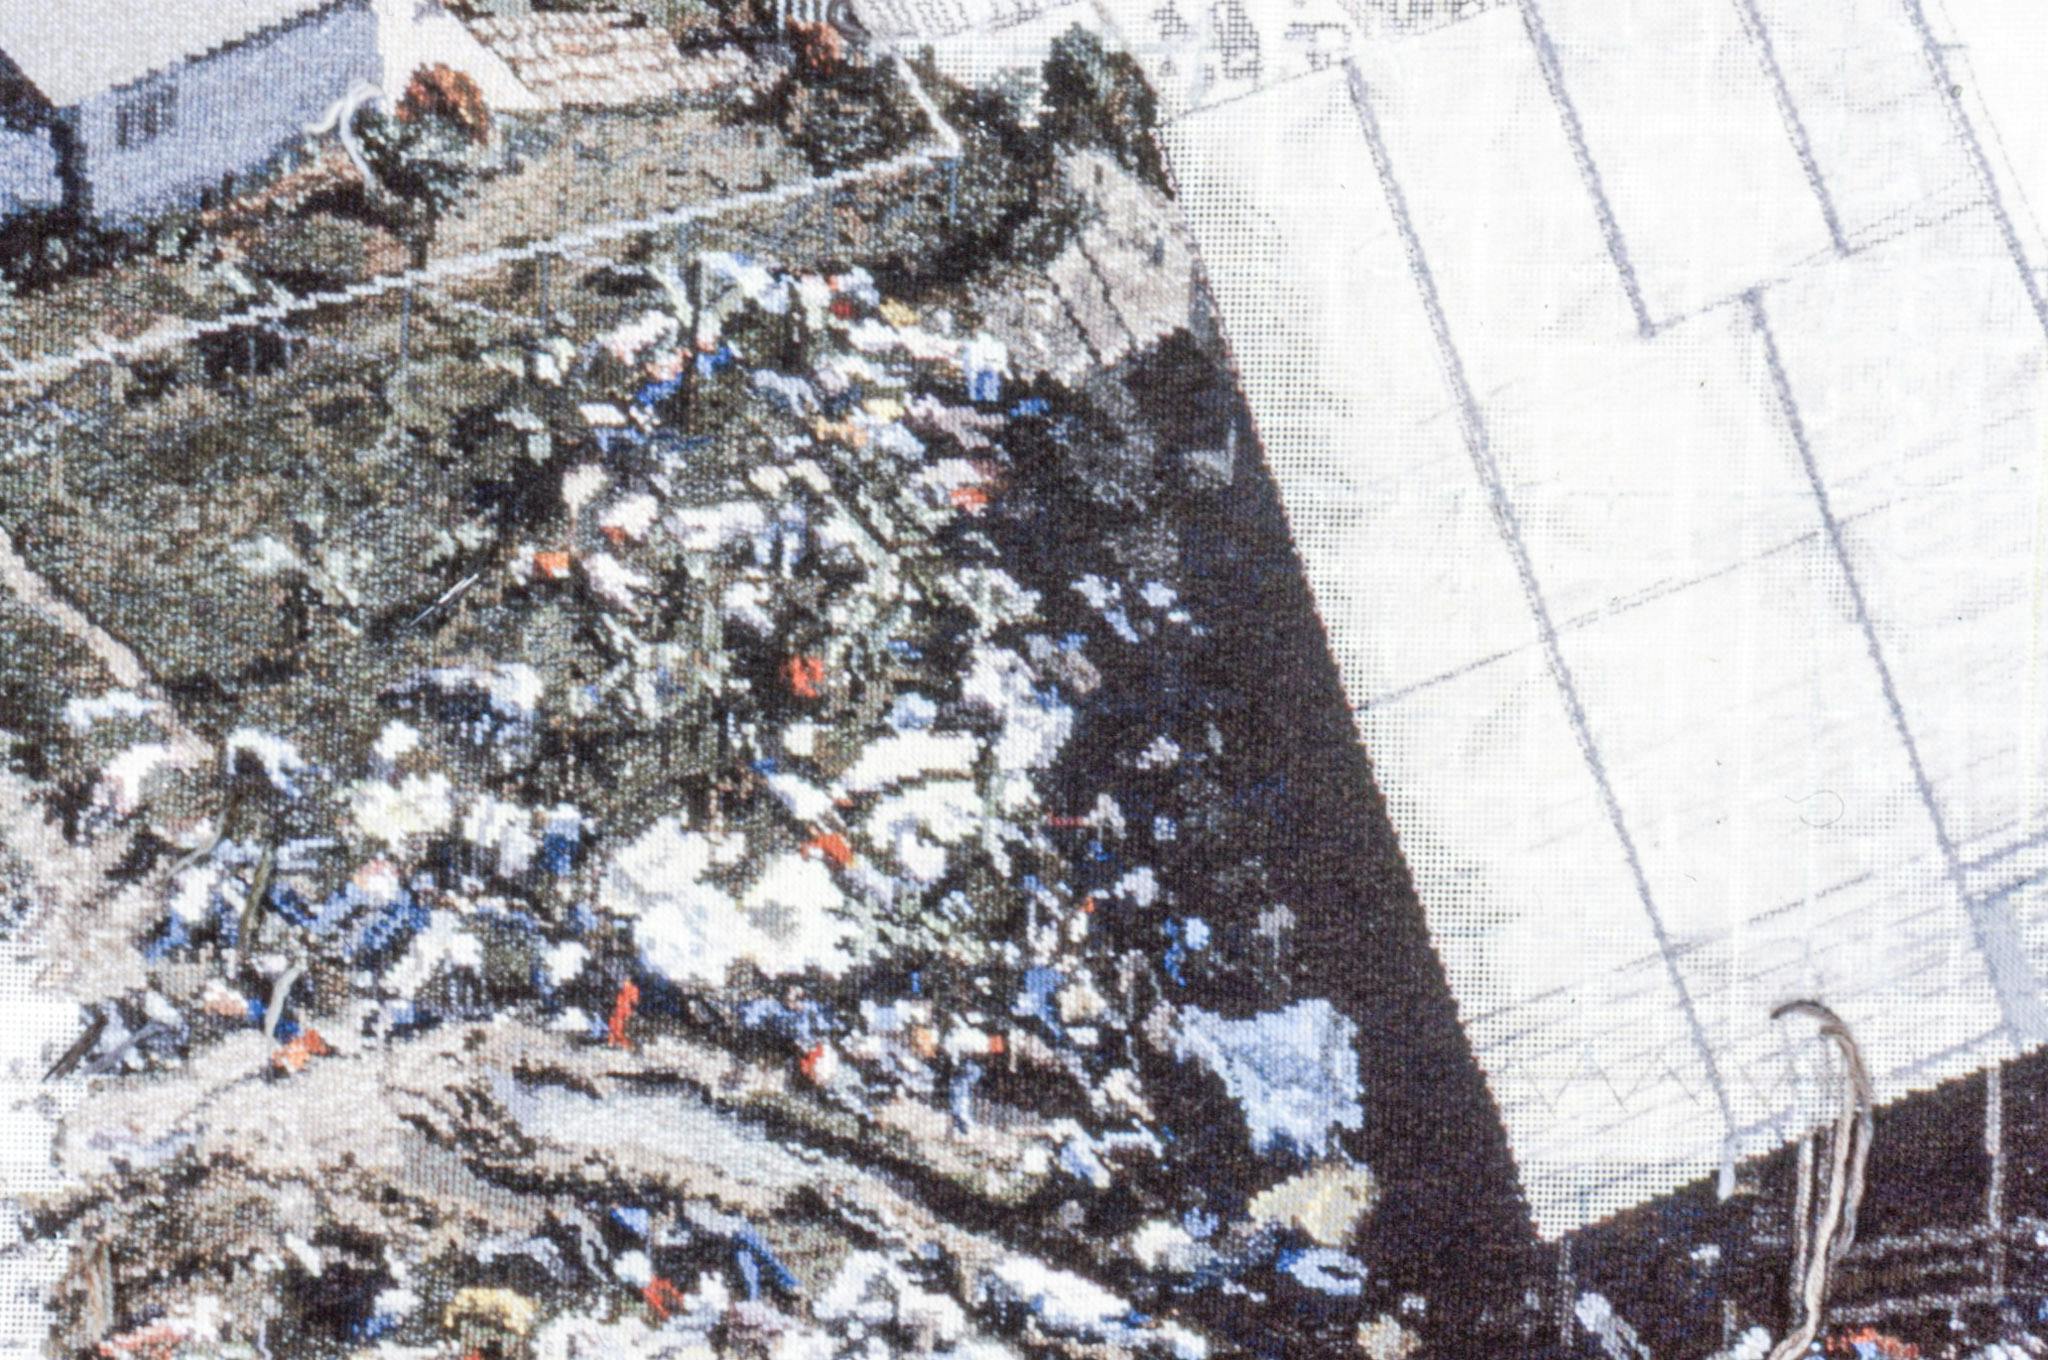 A detailed image of an embroidered carpet, with threads hanging from it. The carpet is based on a bird's-eye image of the Jonestown massacre, and this closeup shows a section with bodies on the grass. 